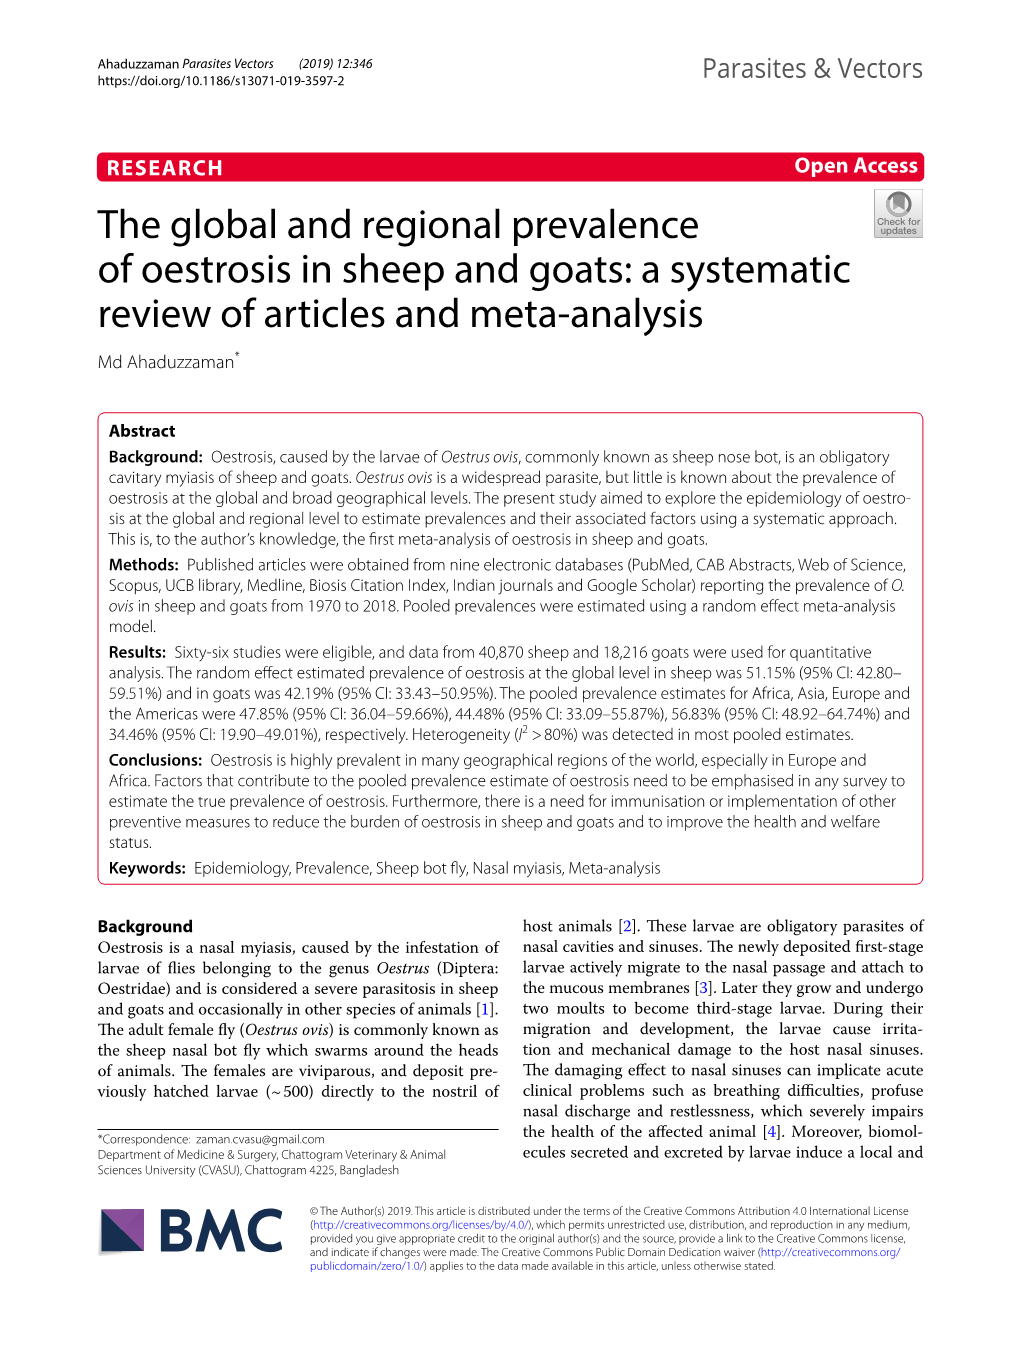 The Global and Regional Prevalence of Oestrosis in Sheep and Goats: a Systematic Review of Articles and Meta‑Analysis Md Ahaduzzaman*